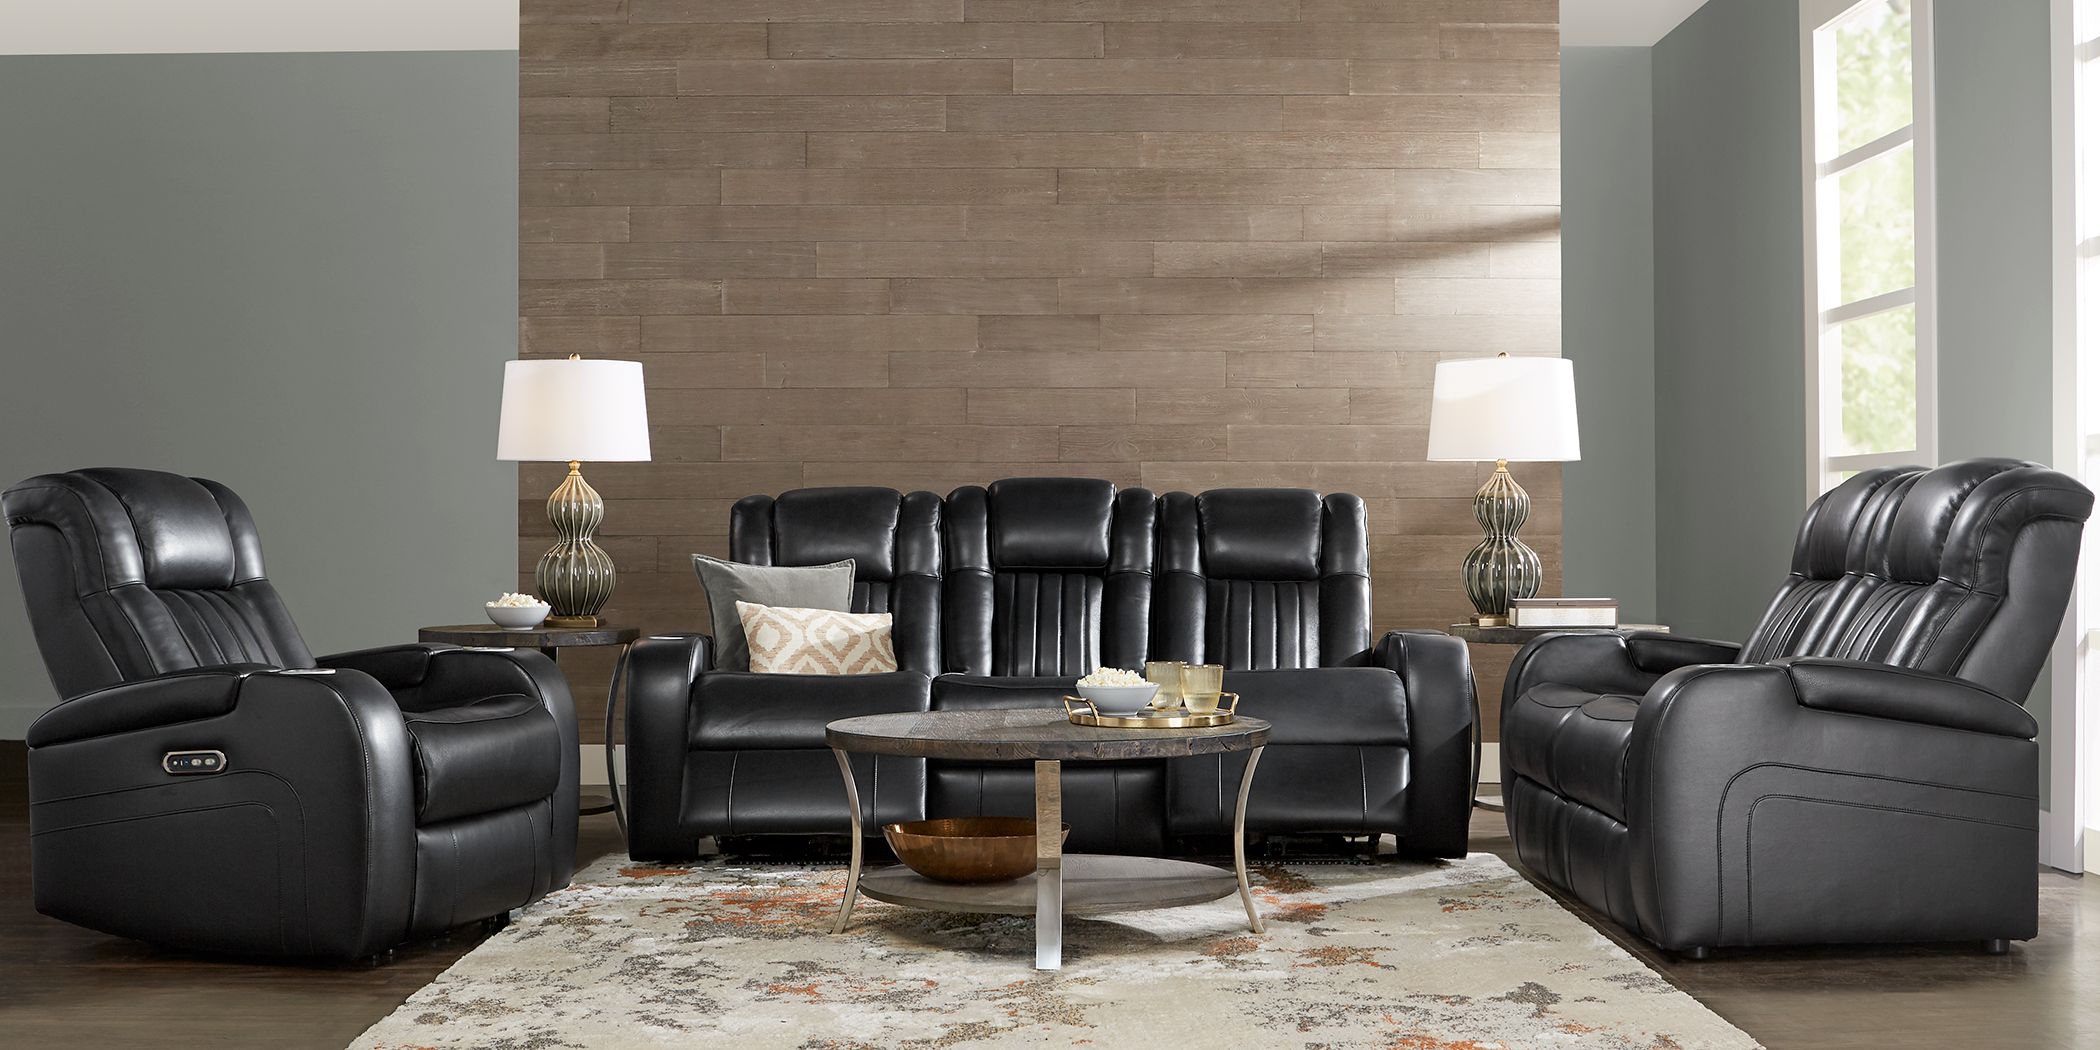 Black Leather Living Room Sets Sofas, Black Leather Couches Living Room